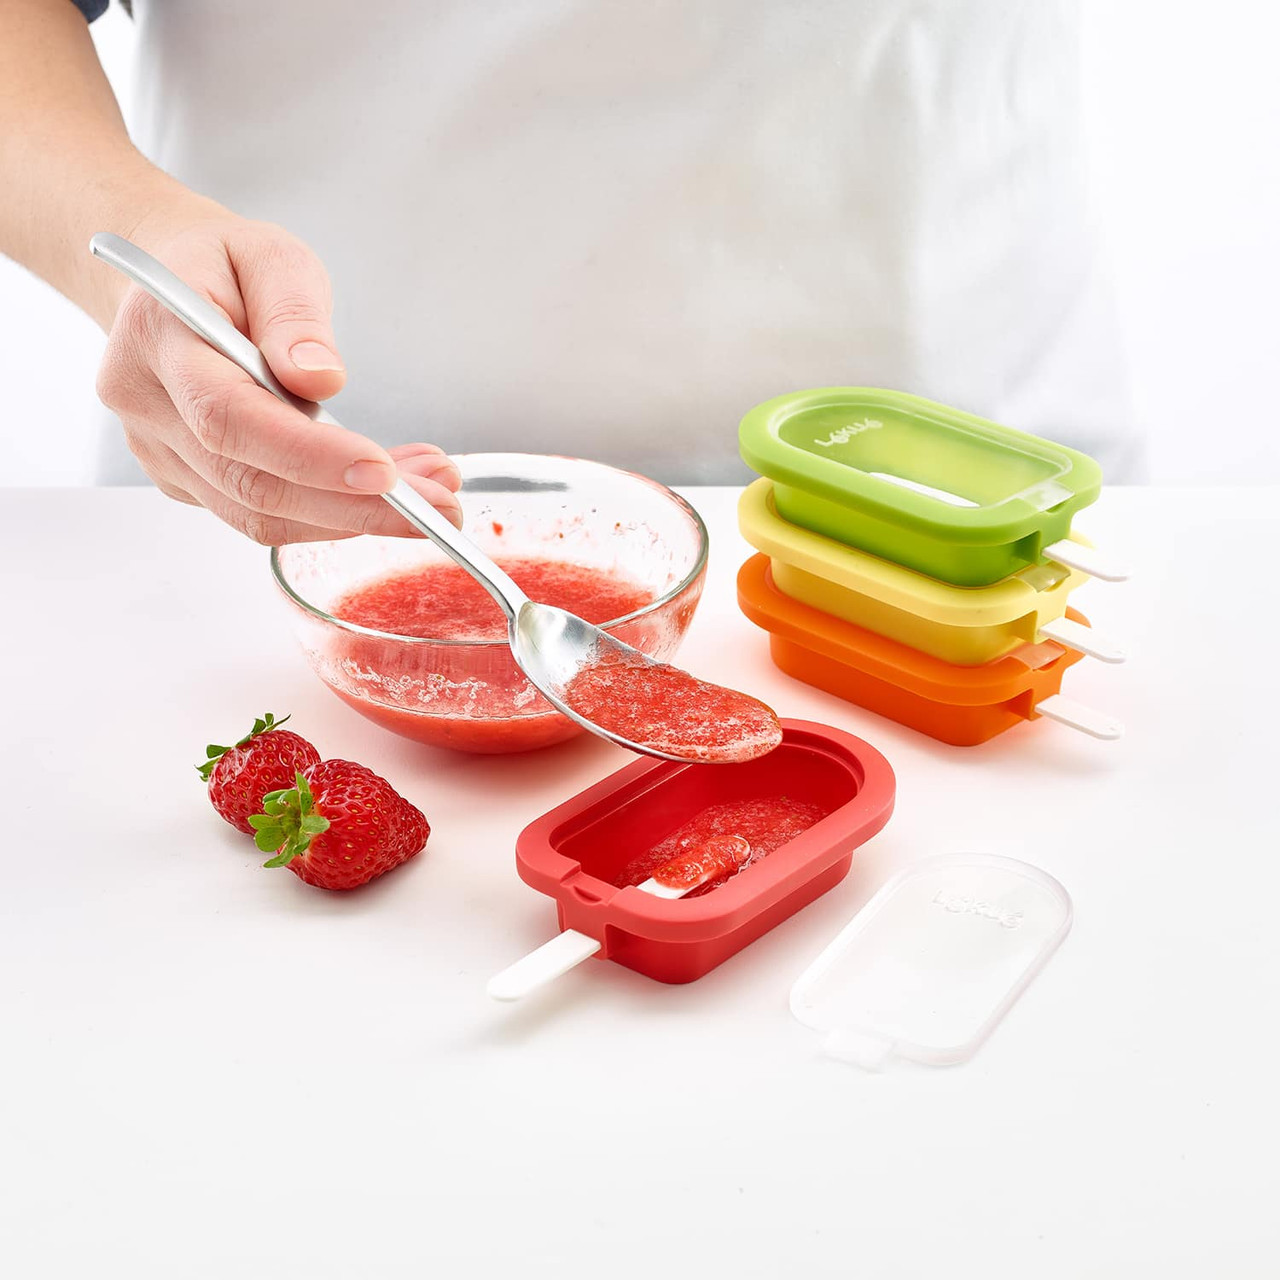 https://cdn11.bigcommerce.com/s-hccytny0od/images/stencil/1280x1280/products/3986/14581/lekue-large-stackable-popsicle-molds-7__13864.1617524826.jpg?c=2?imbypass=on